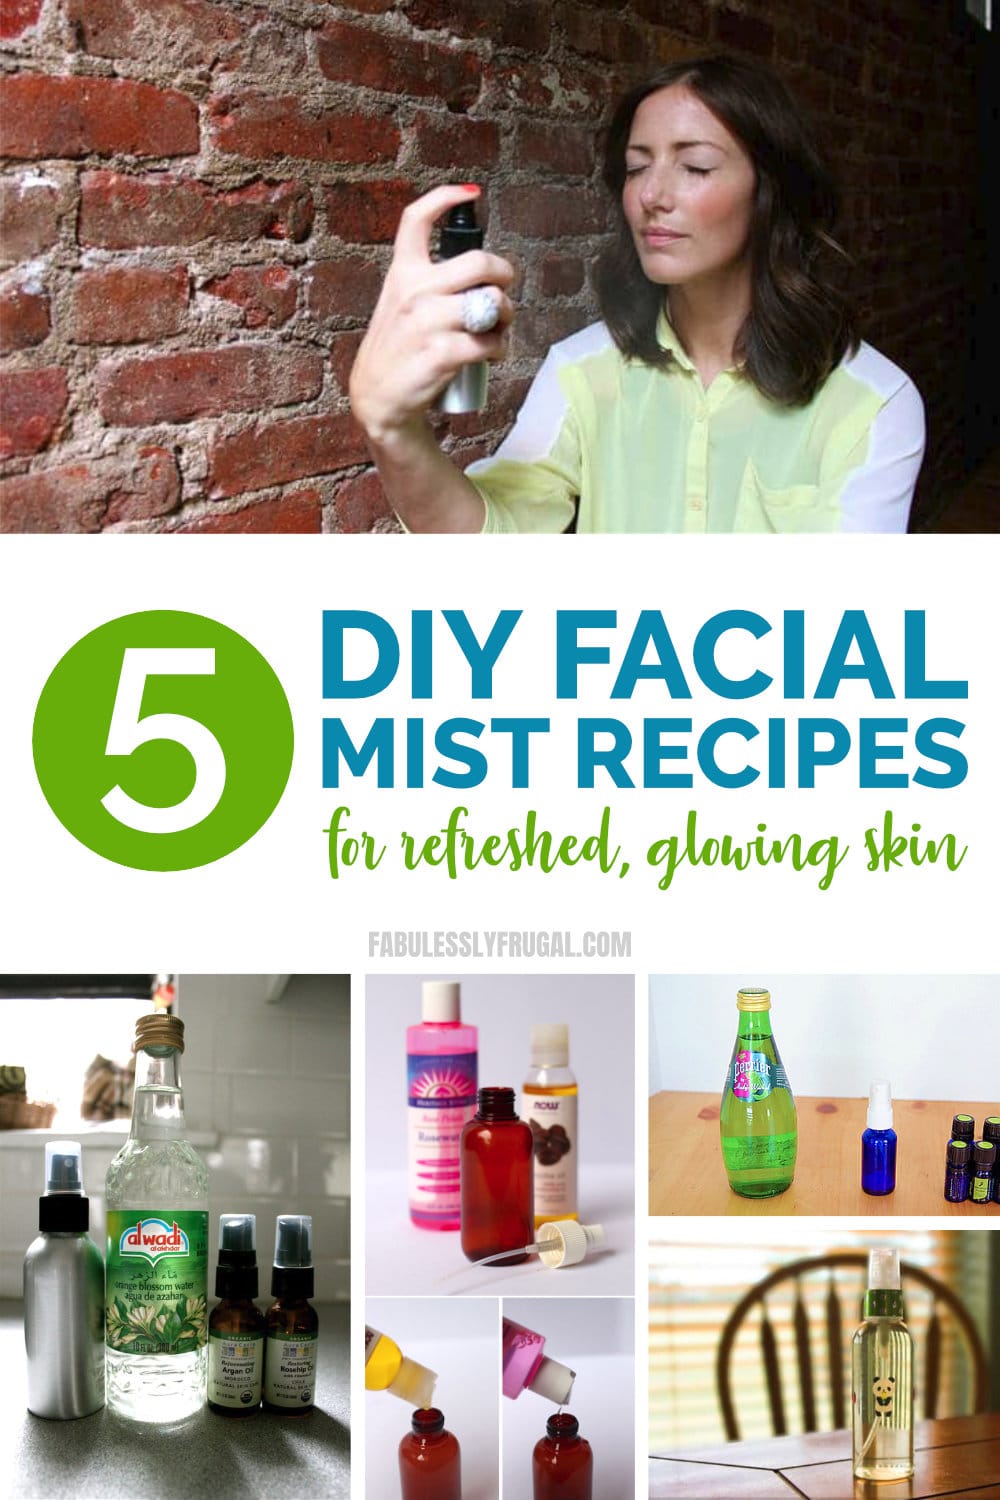 DIY facial mist recipes for refreshed glowing skin